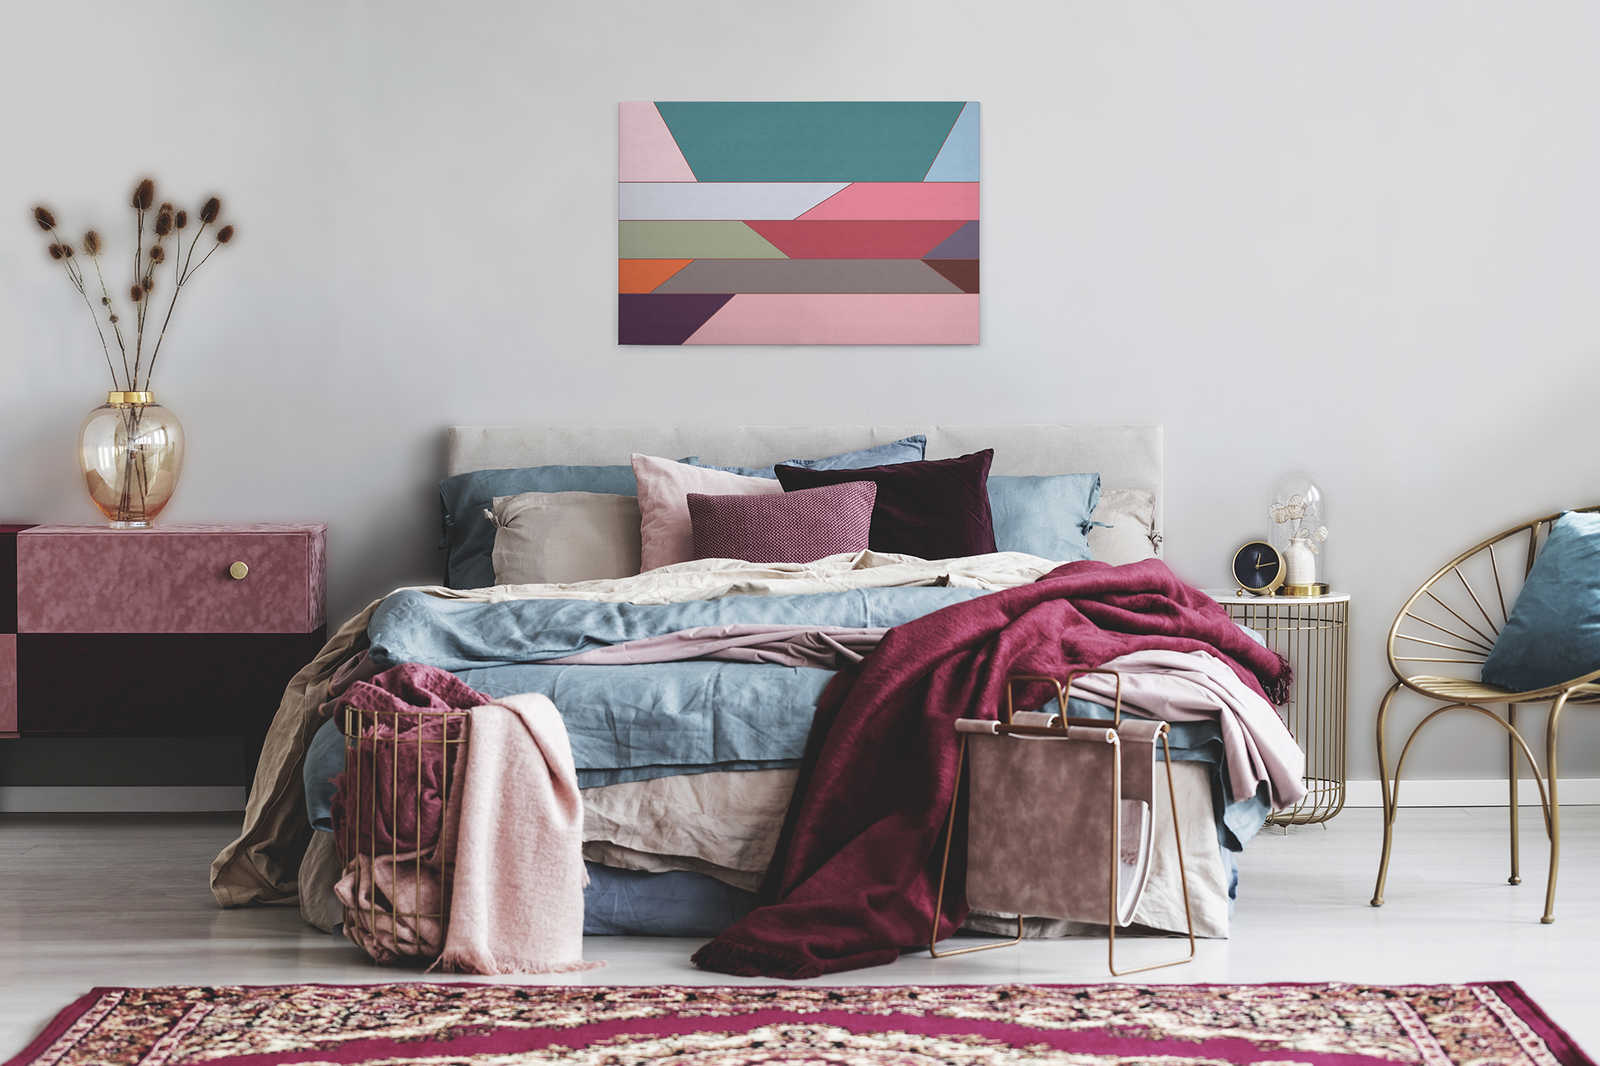             Geometry 2 - Canvas painting with colourful horizontal stripe pattern in ribbed structure - 0.90 m x 0.60 m
        